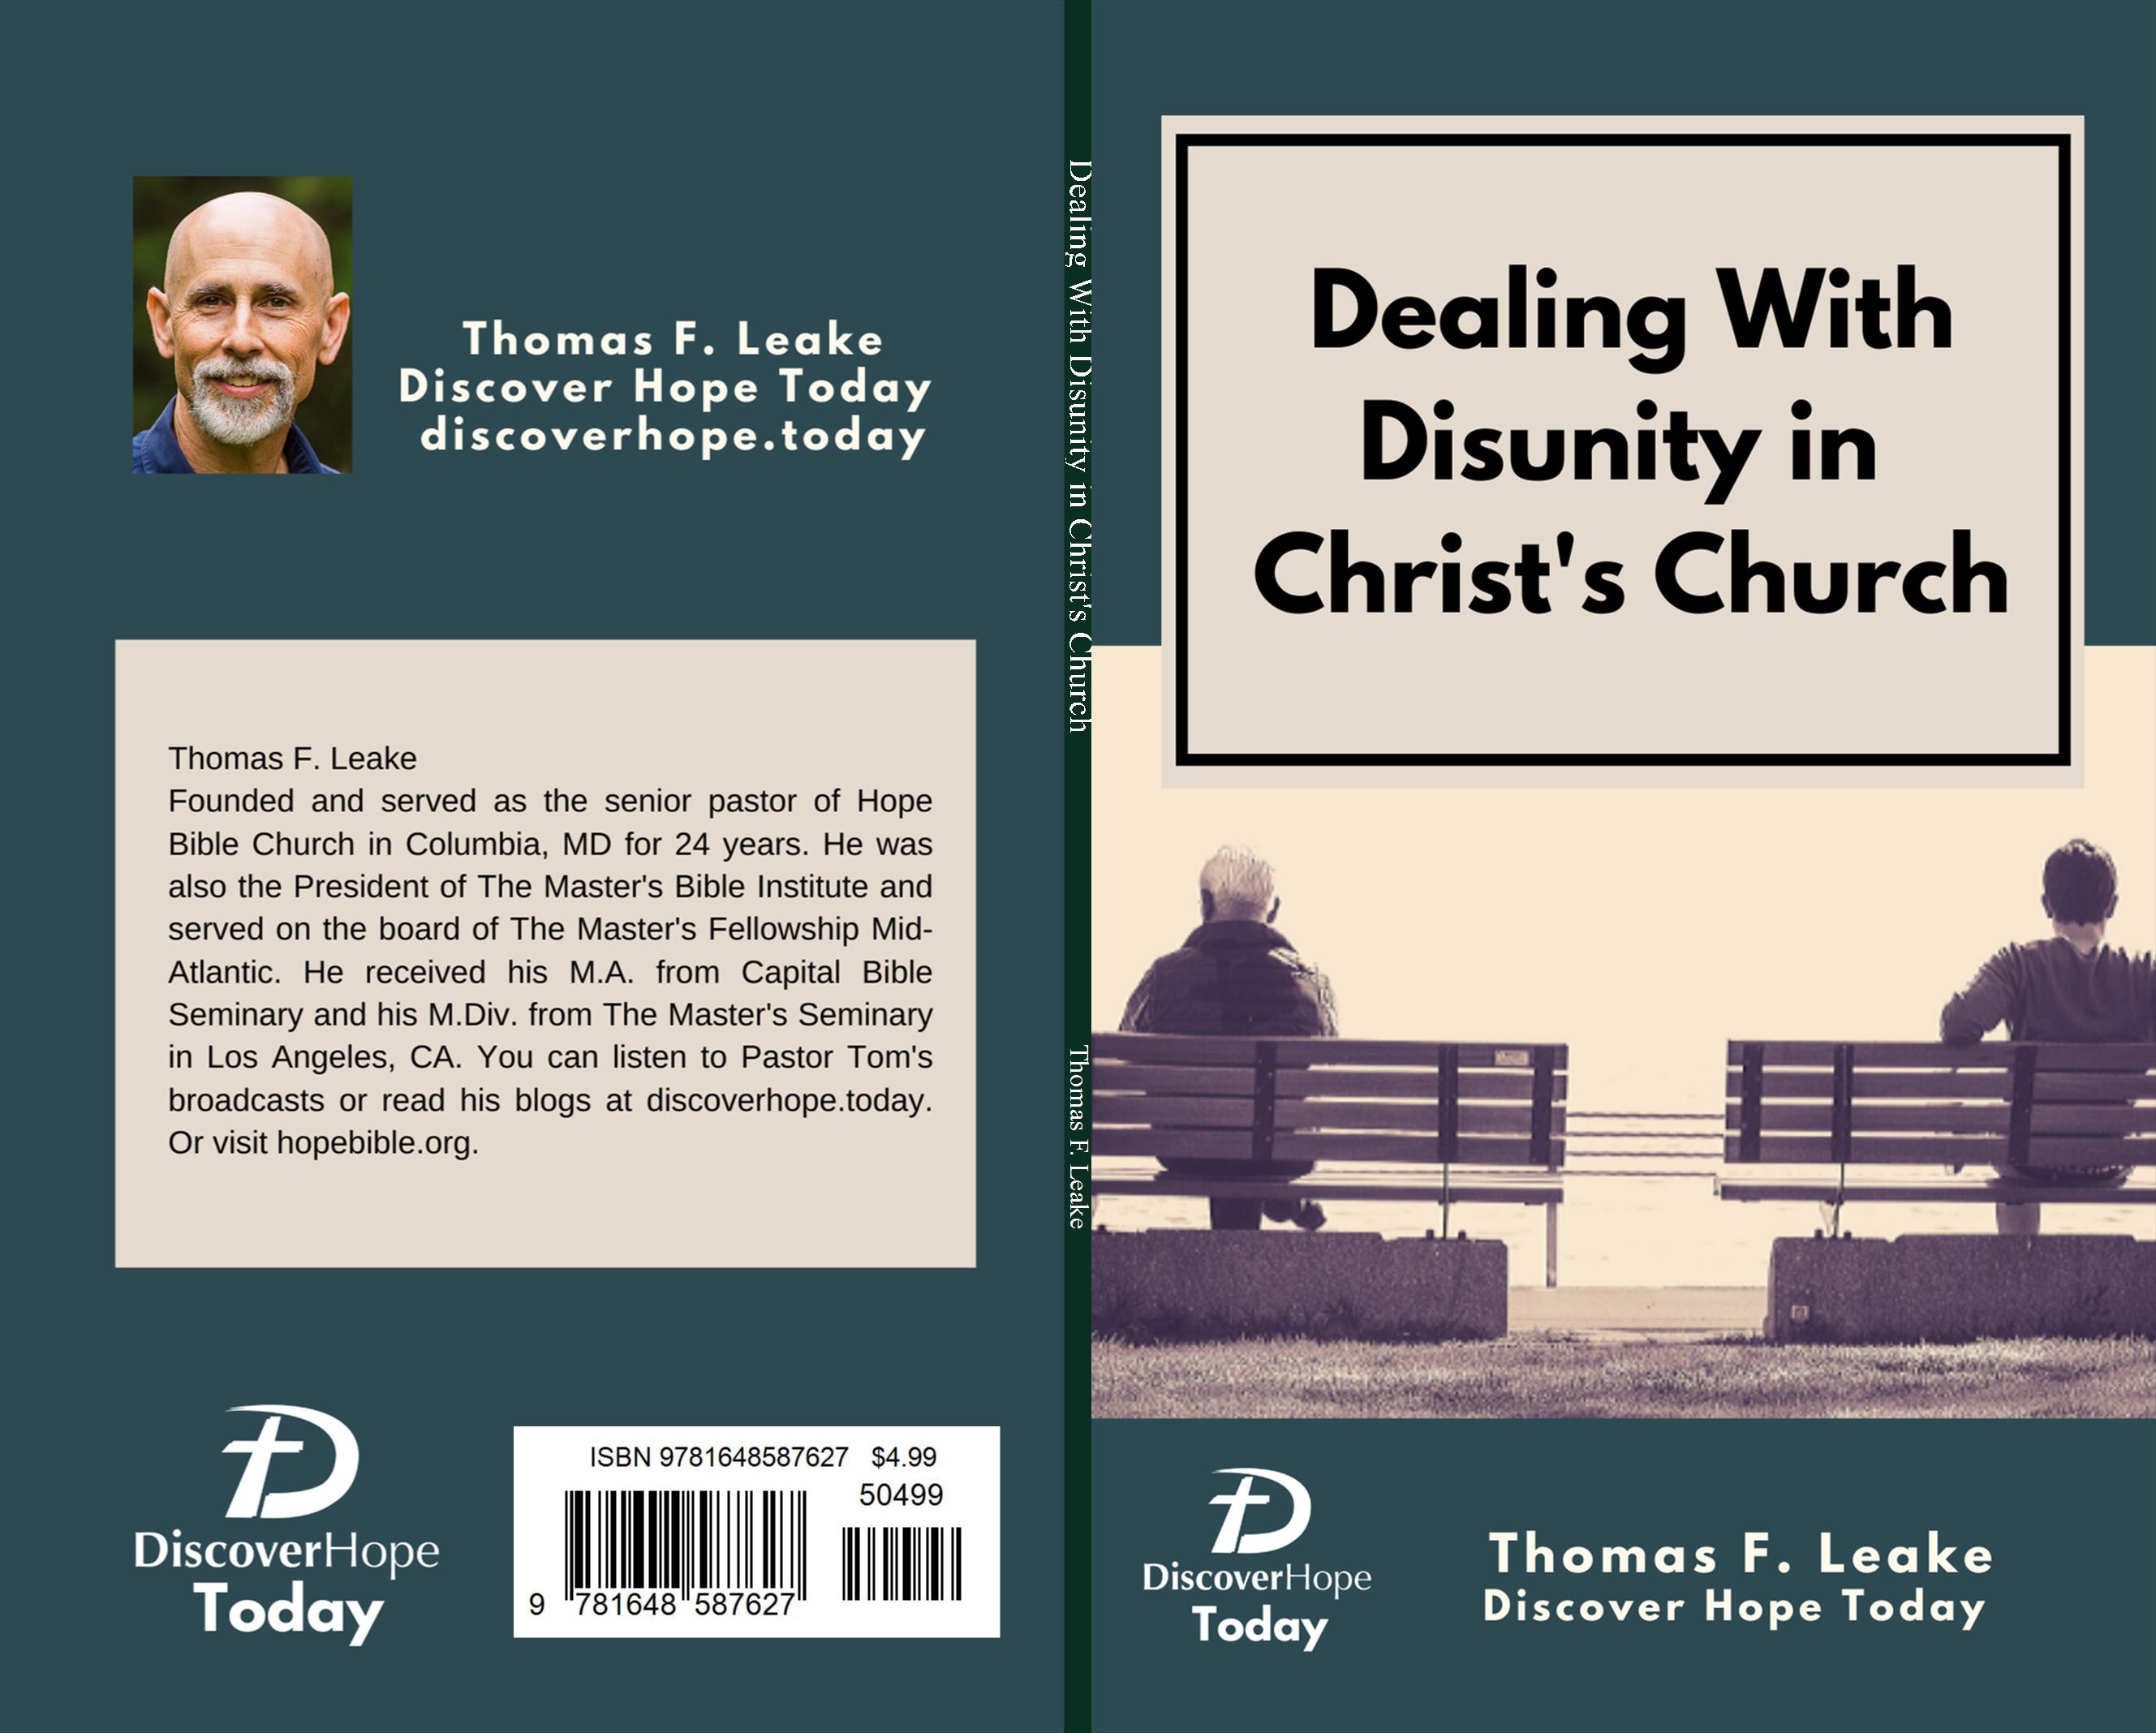 Dealing With Disunity in Christ